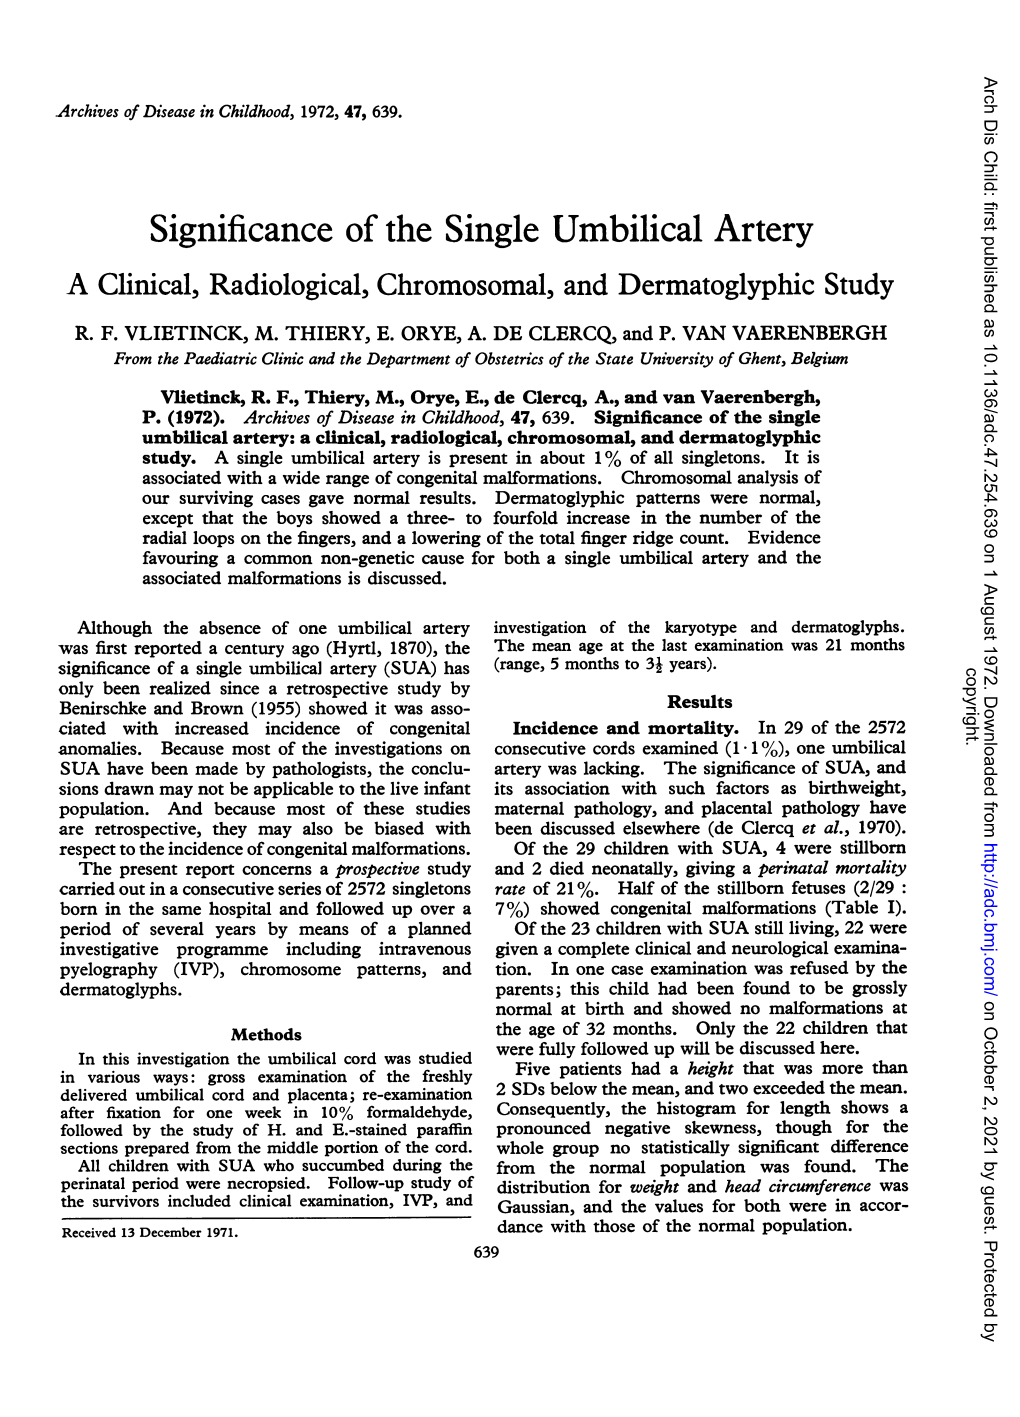 Significance of the Single Umbilical Artery a Clinical, Radiological, Chromosomal, and Dermatoglyphic Study R